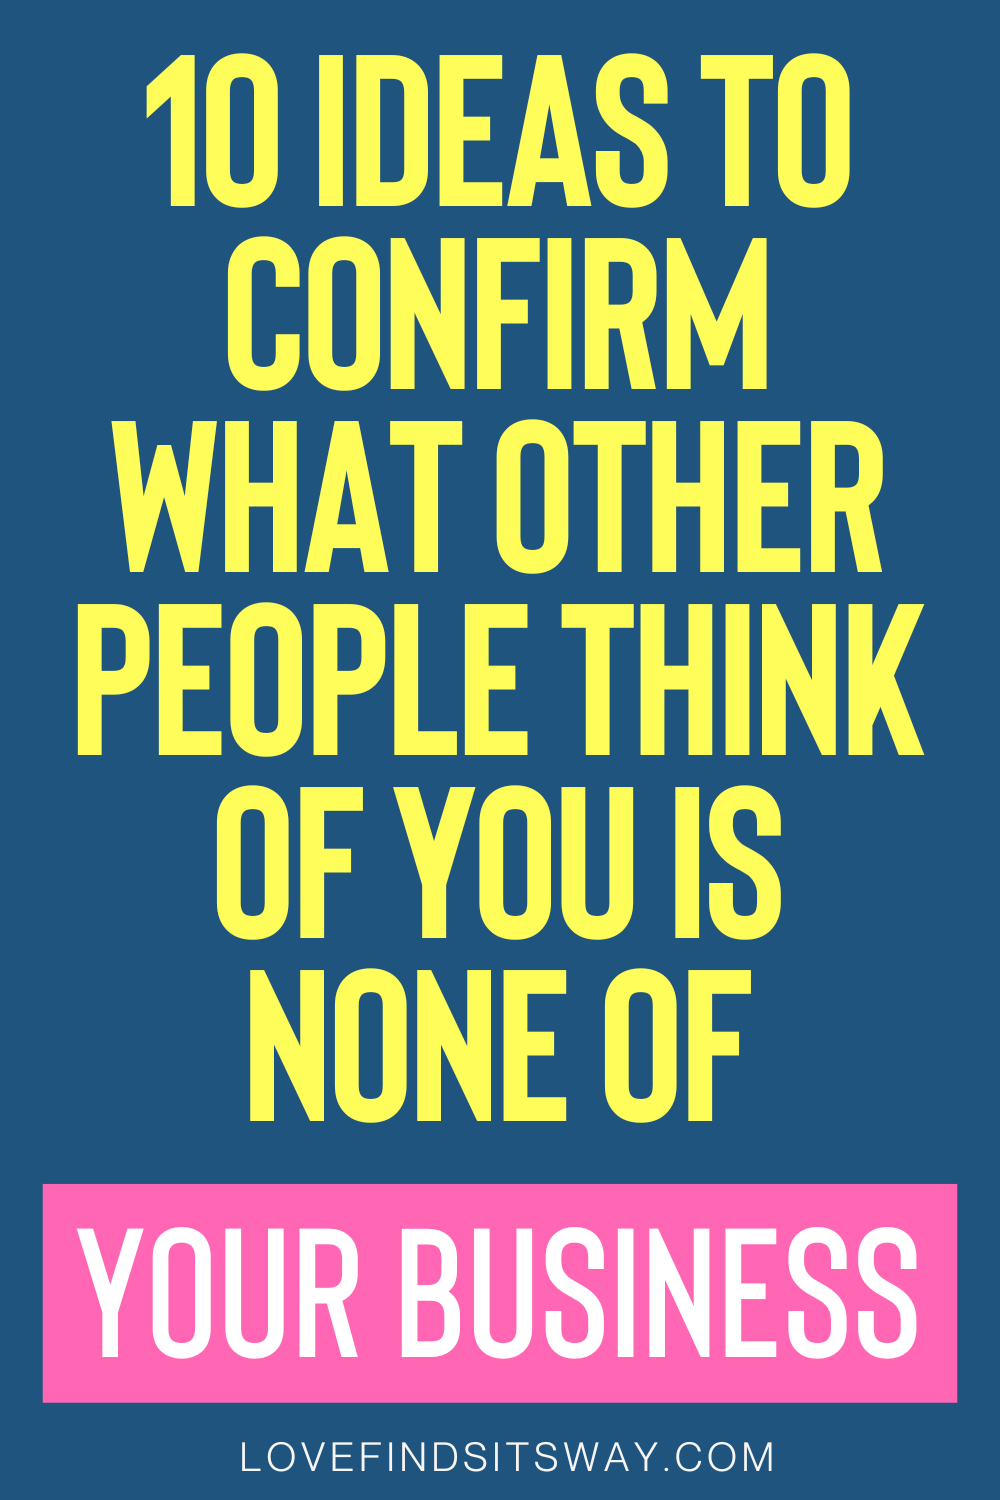 10-Ideas-To-Confirm-What-Other-People-Think-of-You-is-None-Of-Your-Business.